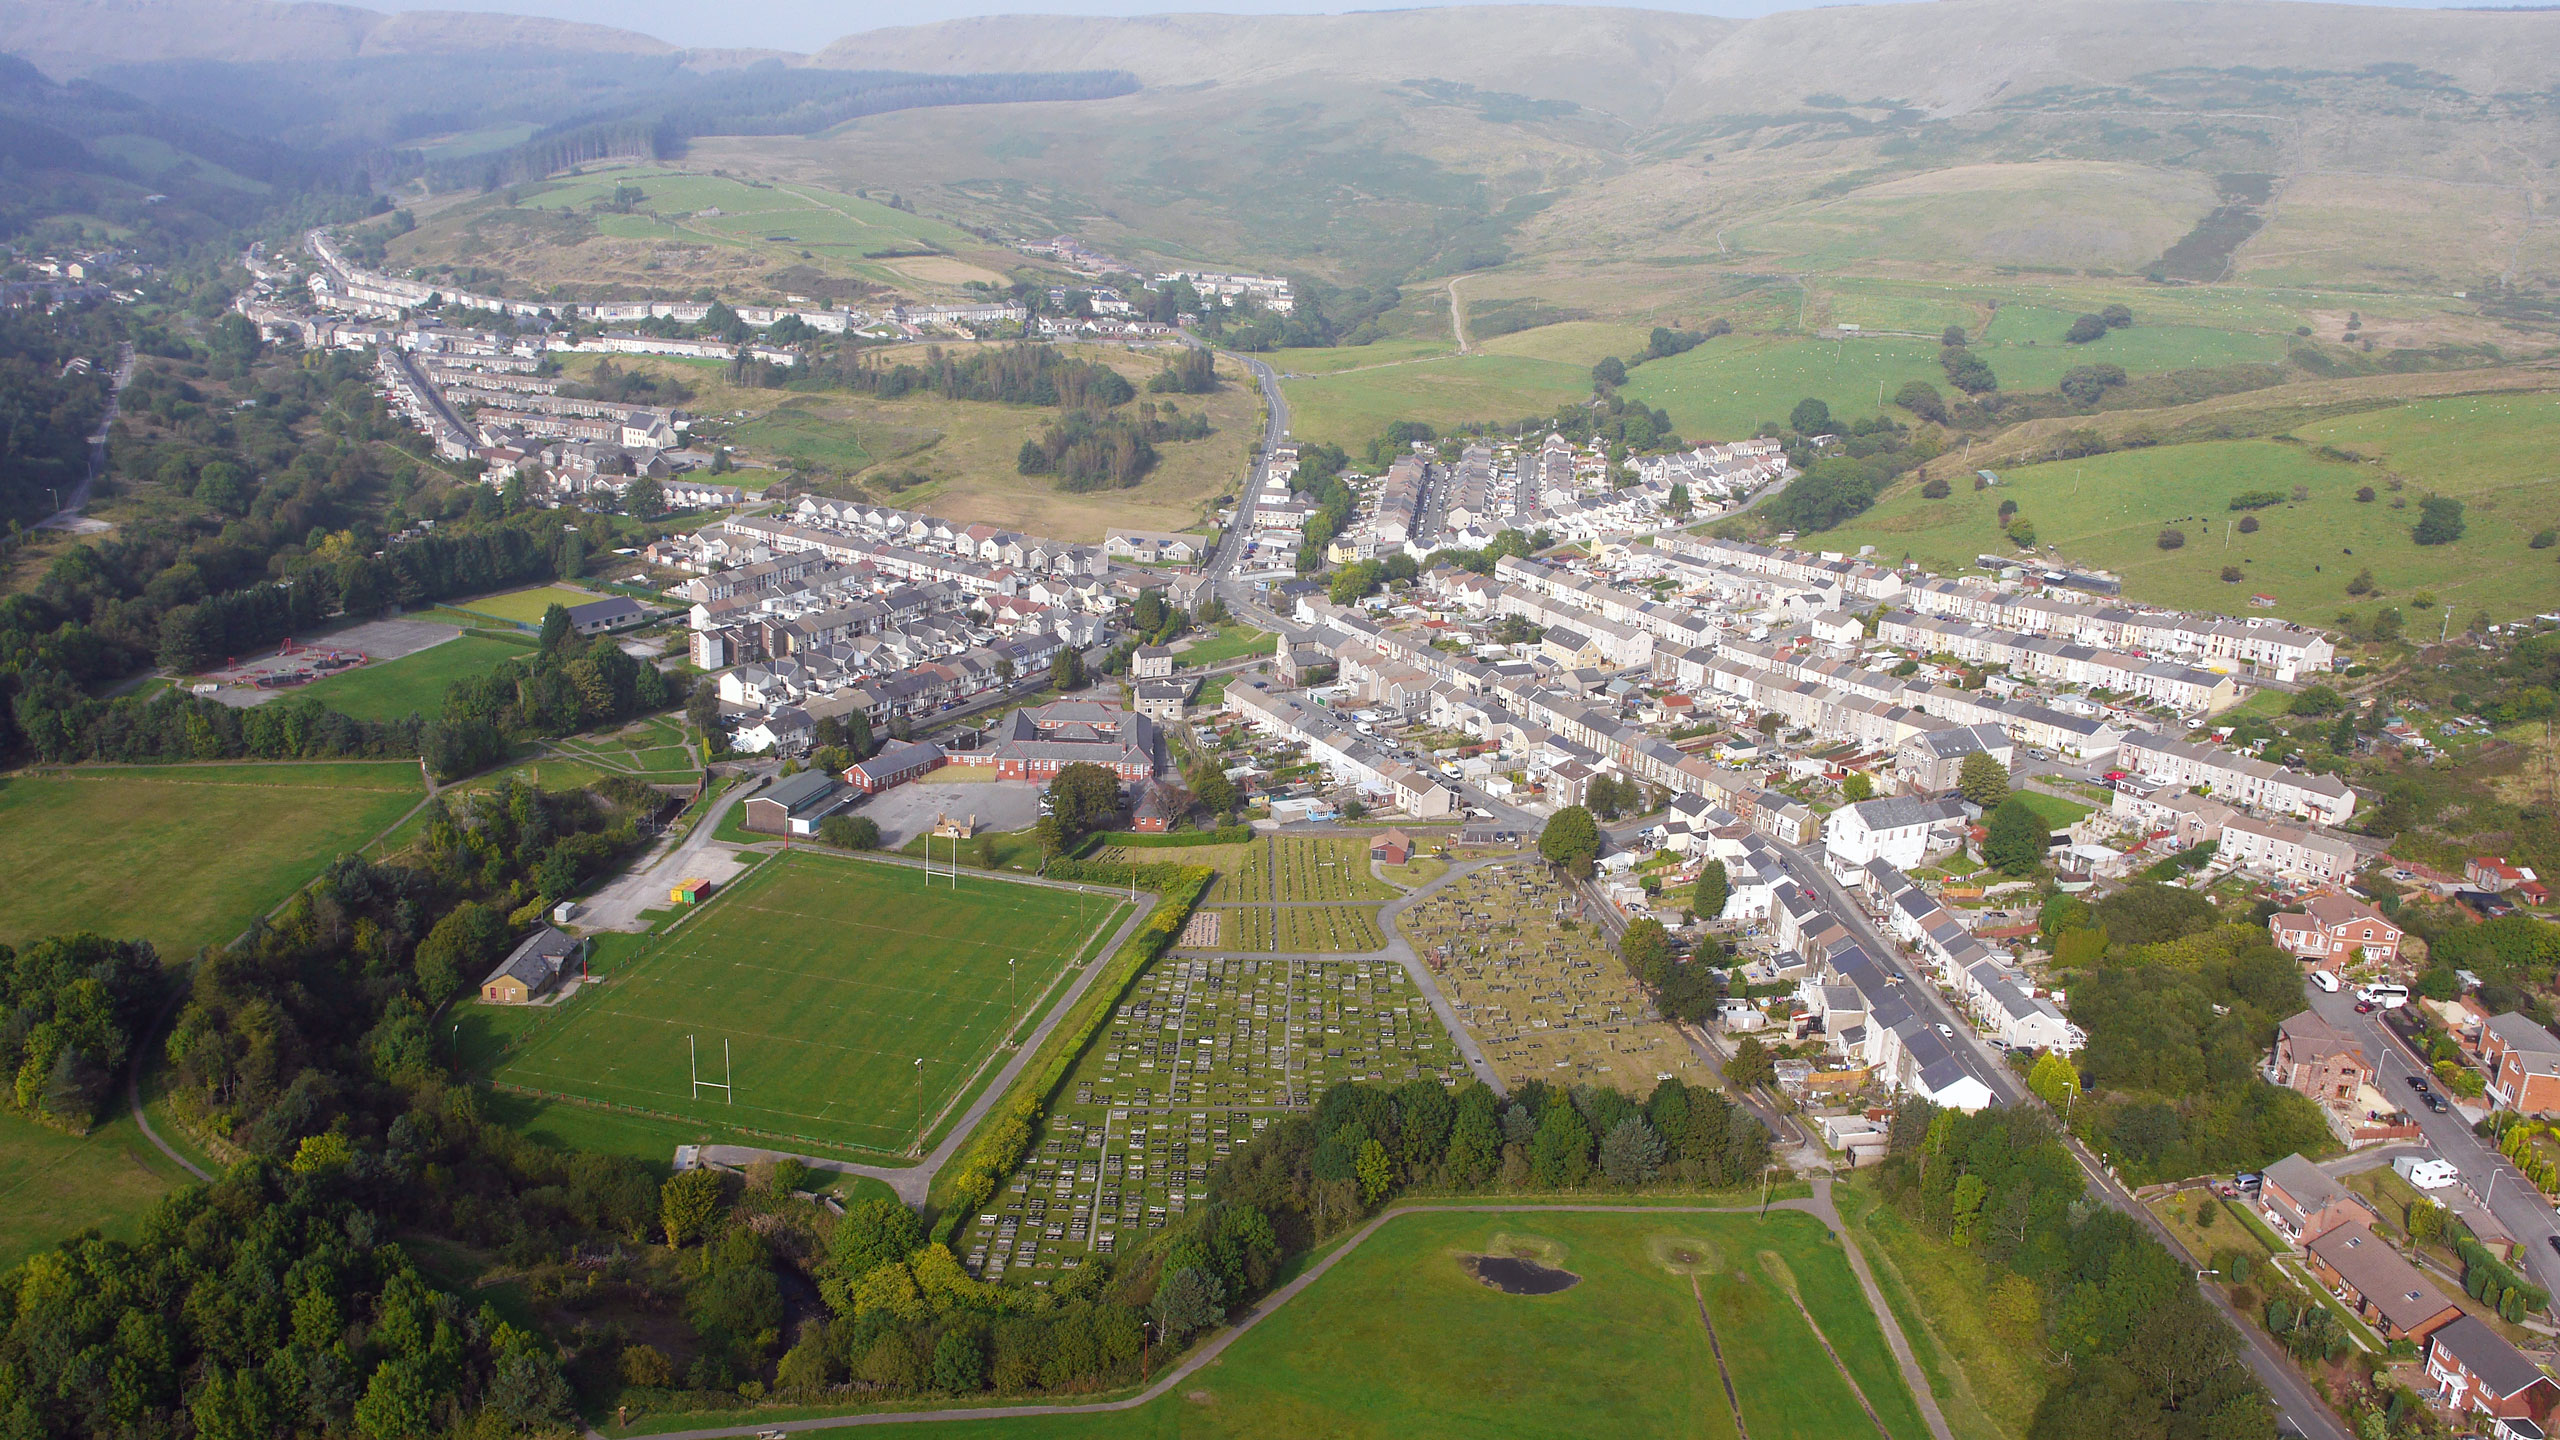 Overhead view of the Garw Valley